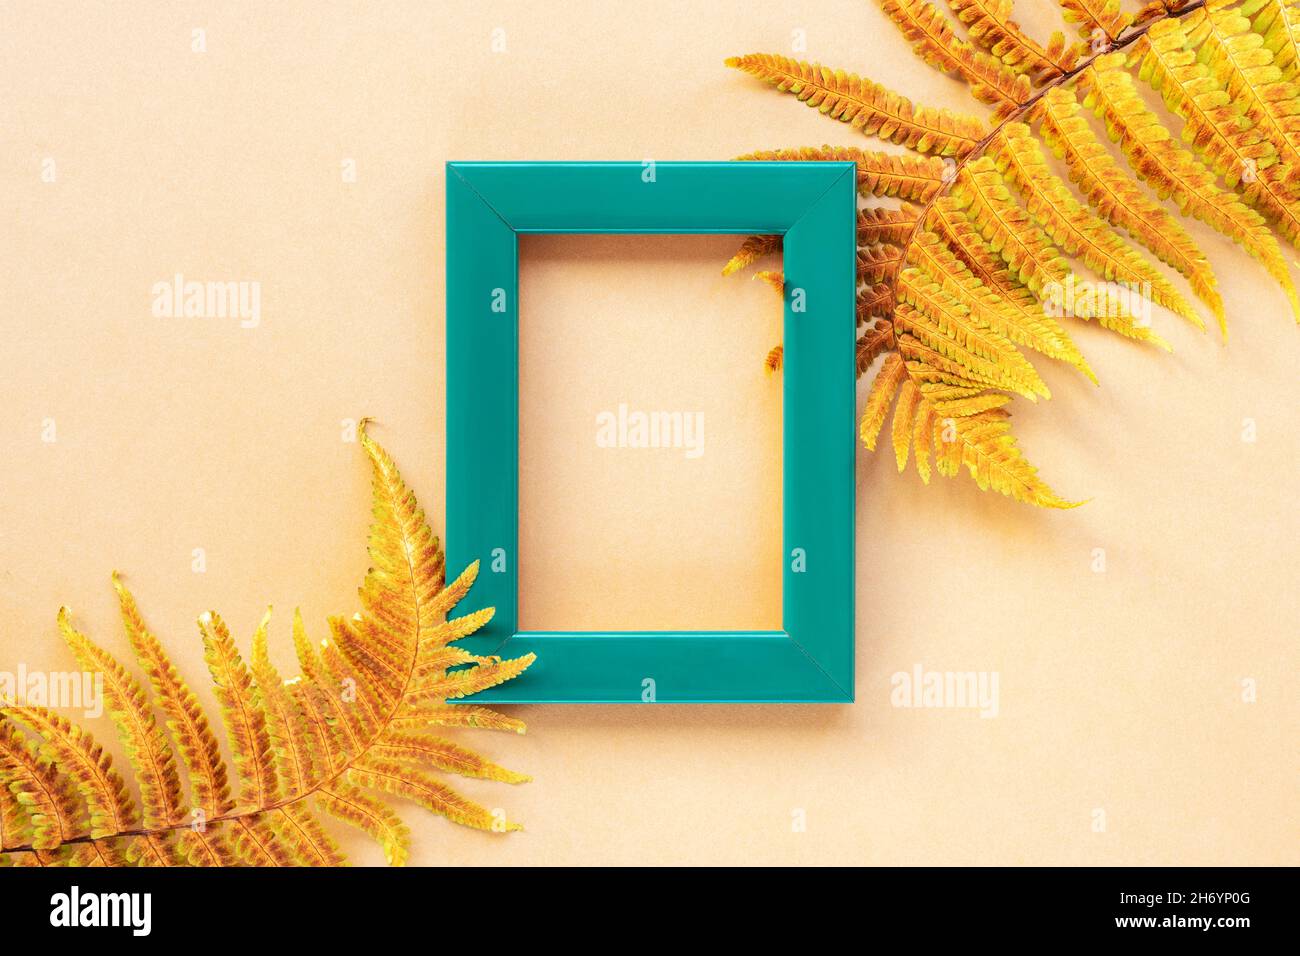 Green picture frame and yellow fern leaves on beige background. Top view, flat lay. Mock up. Stock Photo